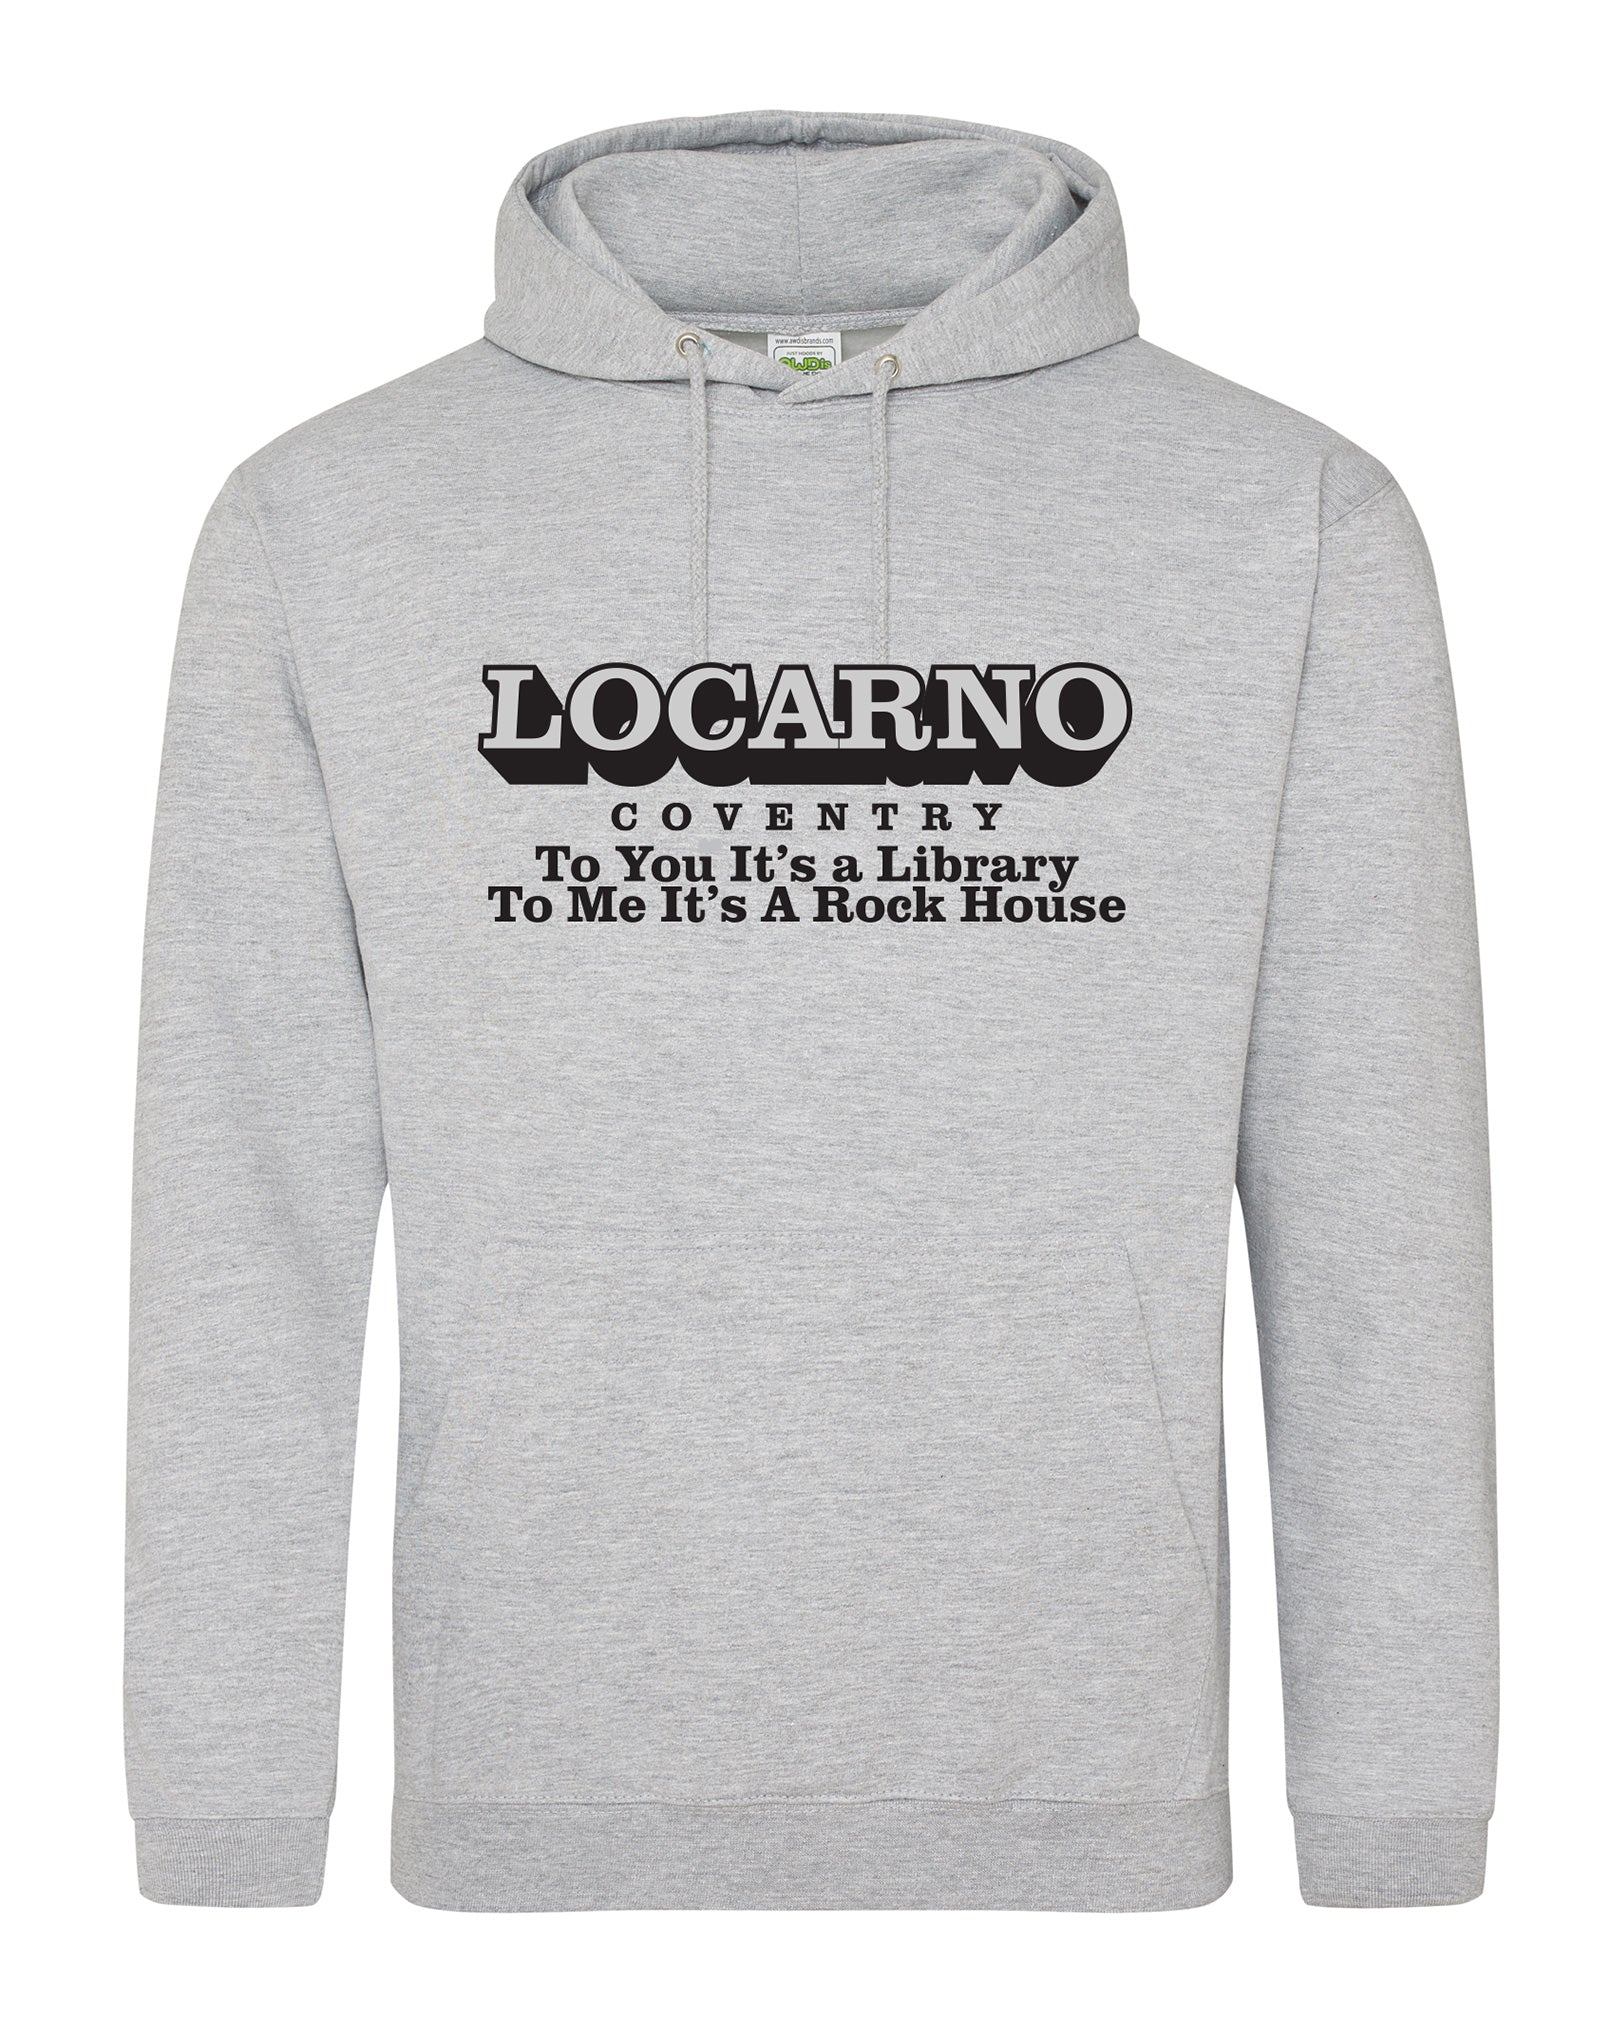 Locarno/Rockhouse - Coventry - unisex fit hoodie - various colours - Dirty Stop Outs